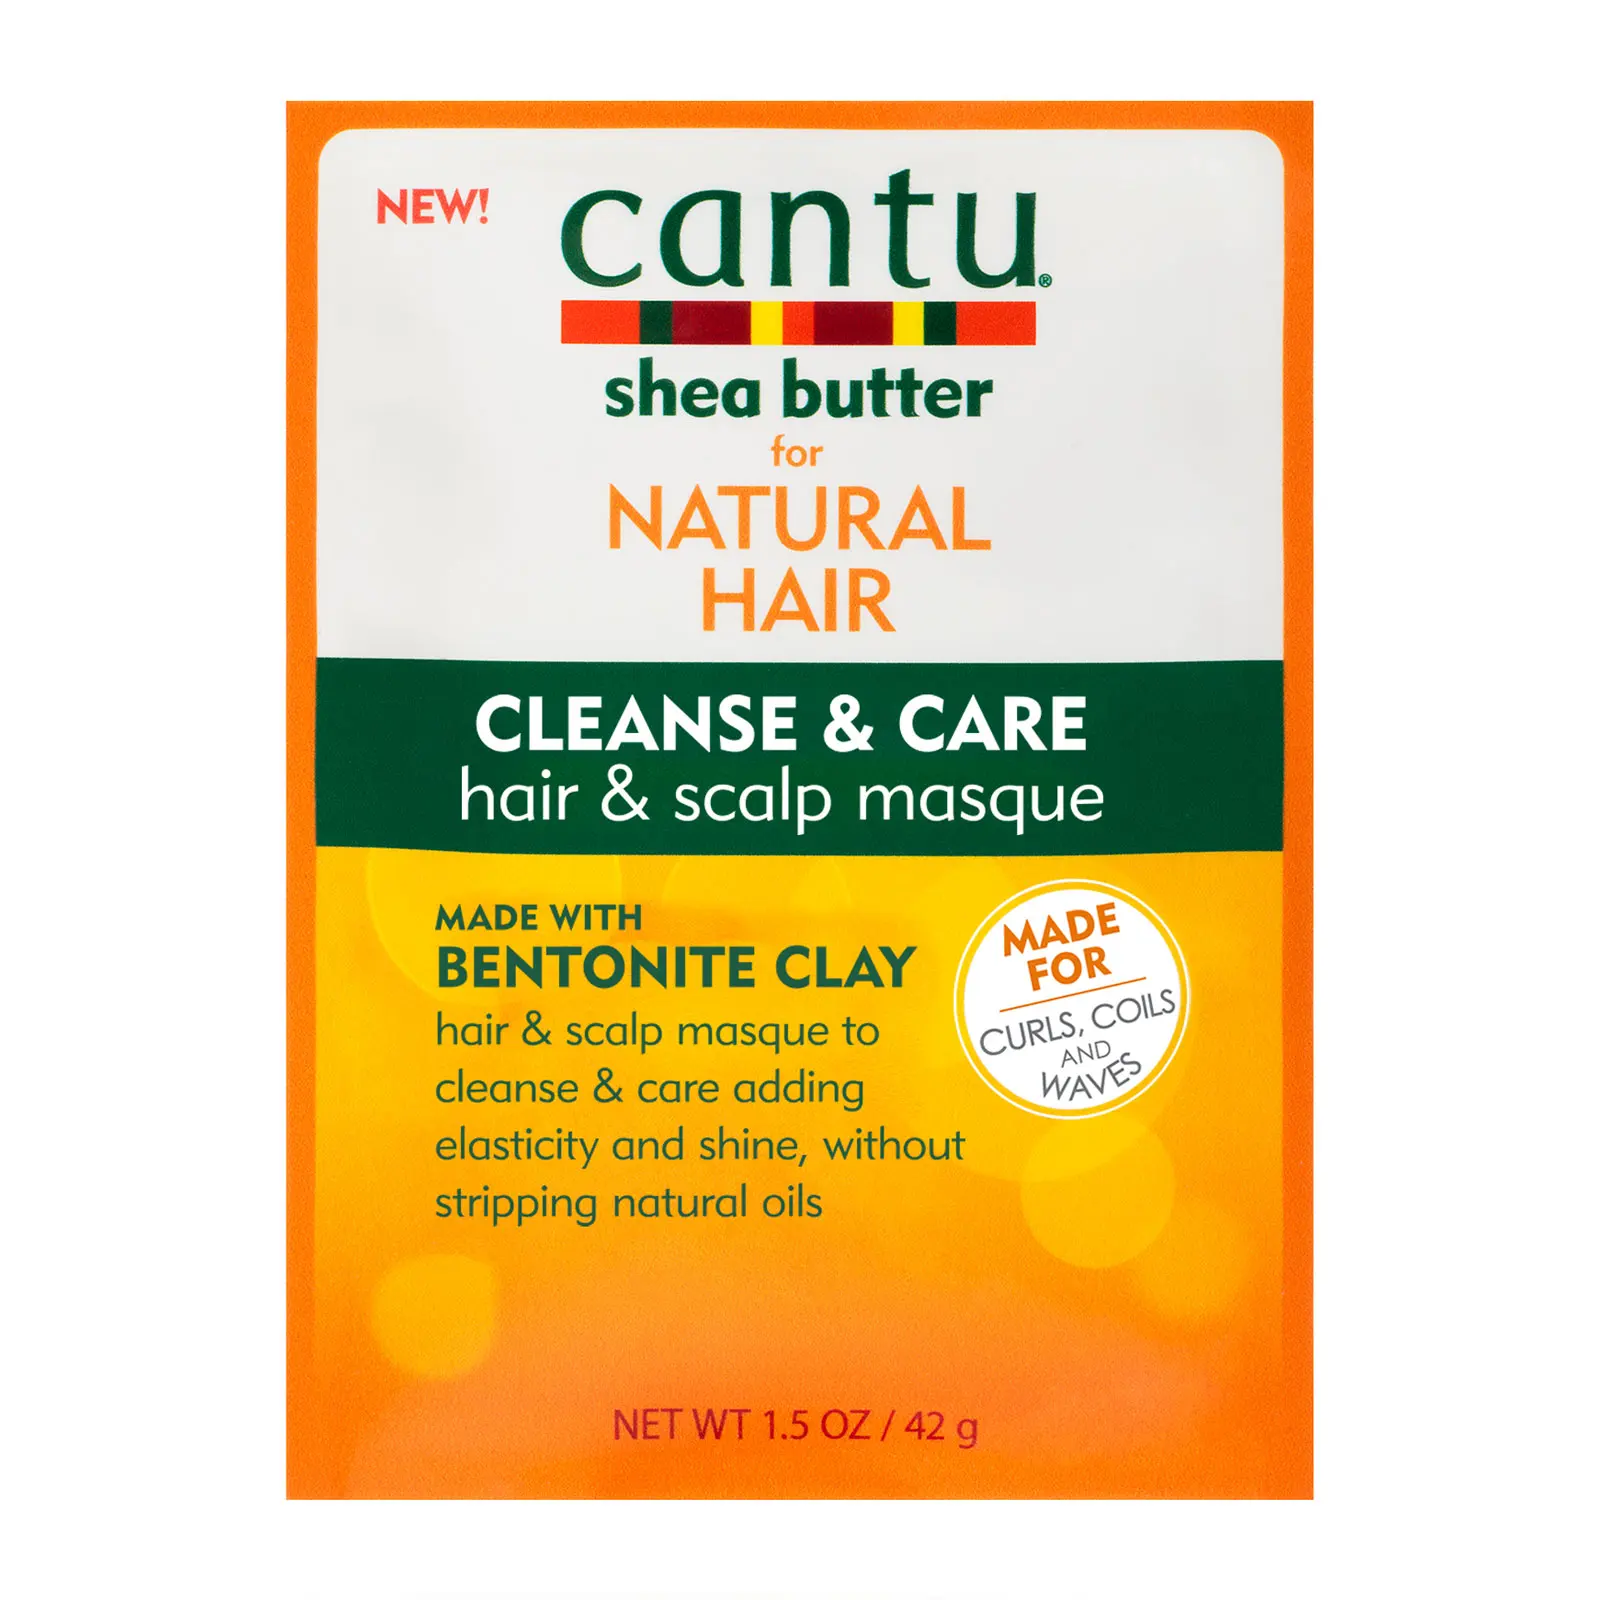 CANTU Cleanse & Care Hair & Scalp Masque with Bentonite Clay 50g £3.00 at Feelunique